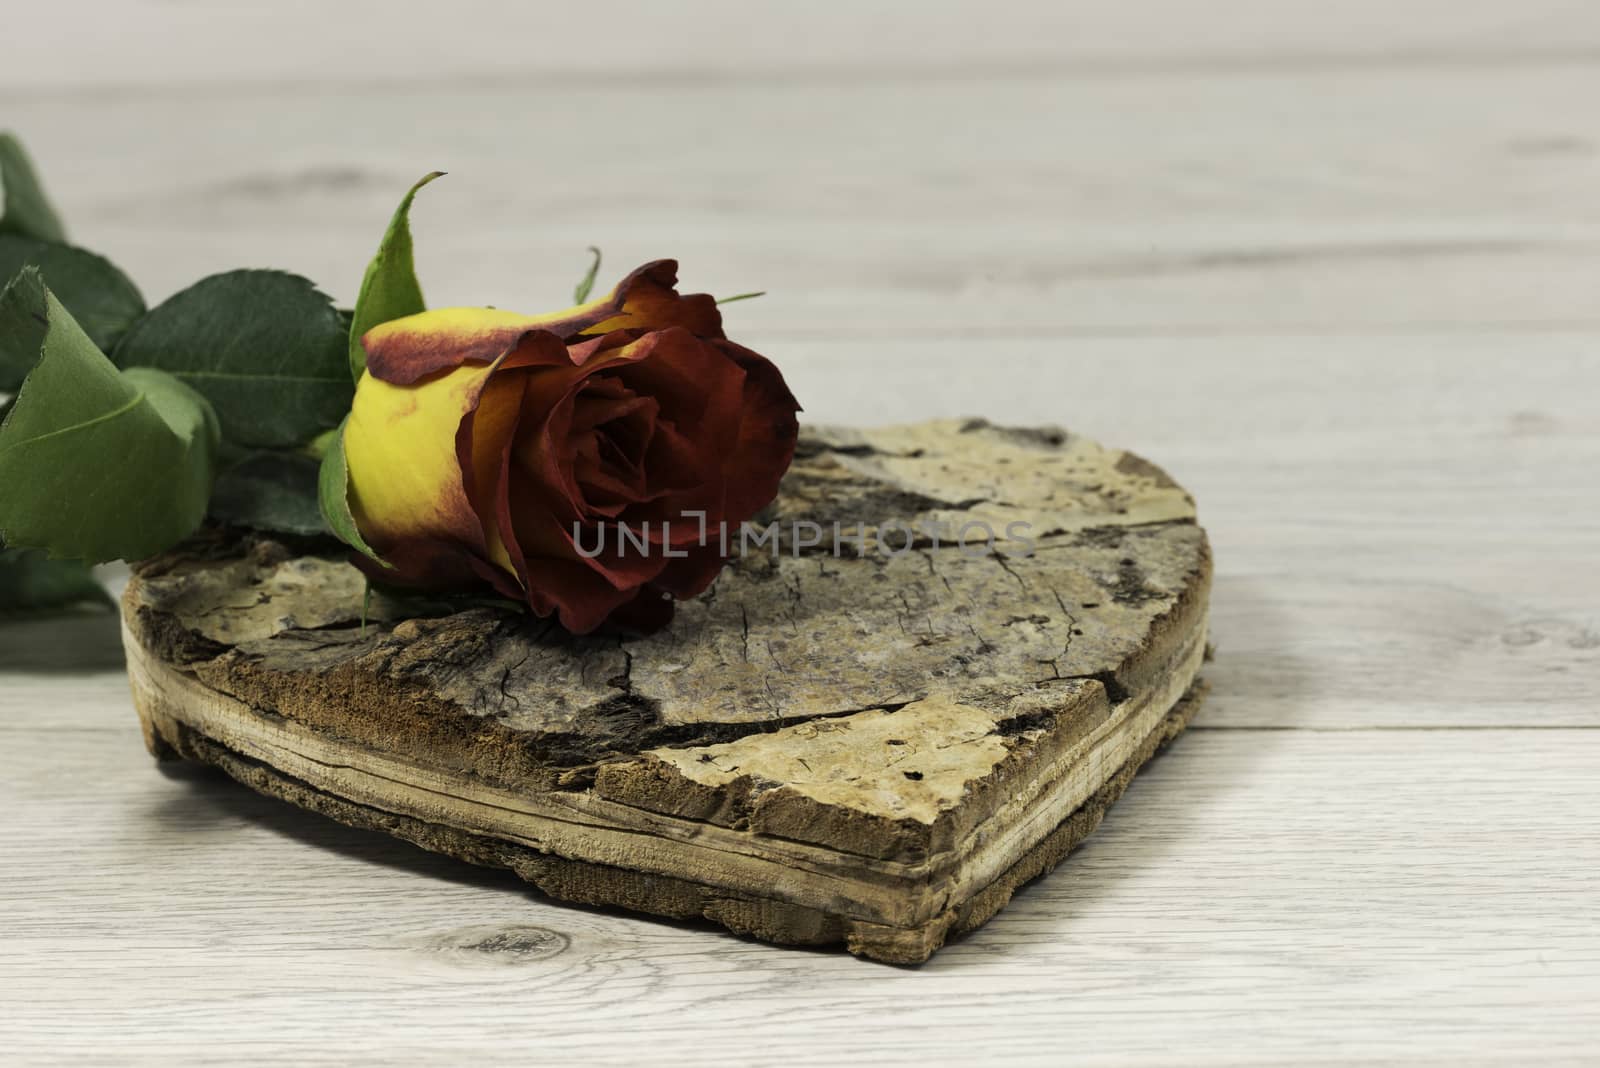 red rose lying on cork heart shape for valentines ot mothers day